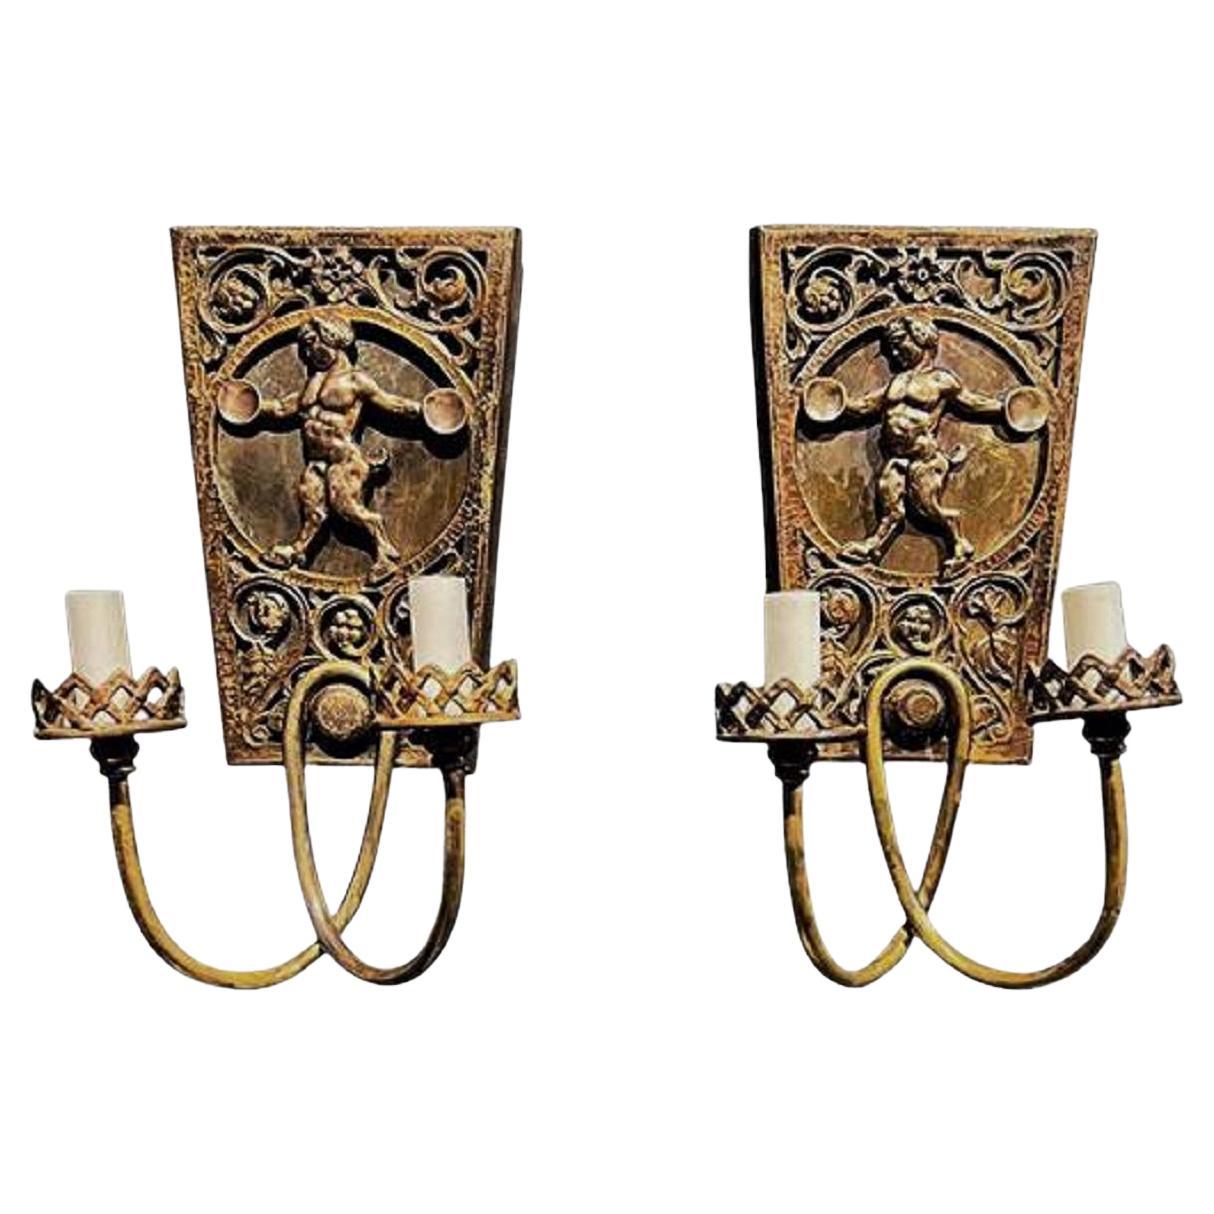 1920's Oscar Bach Gothic style Brown Patinated Sconces For Sale